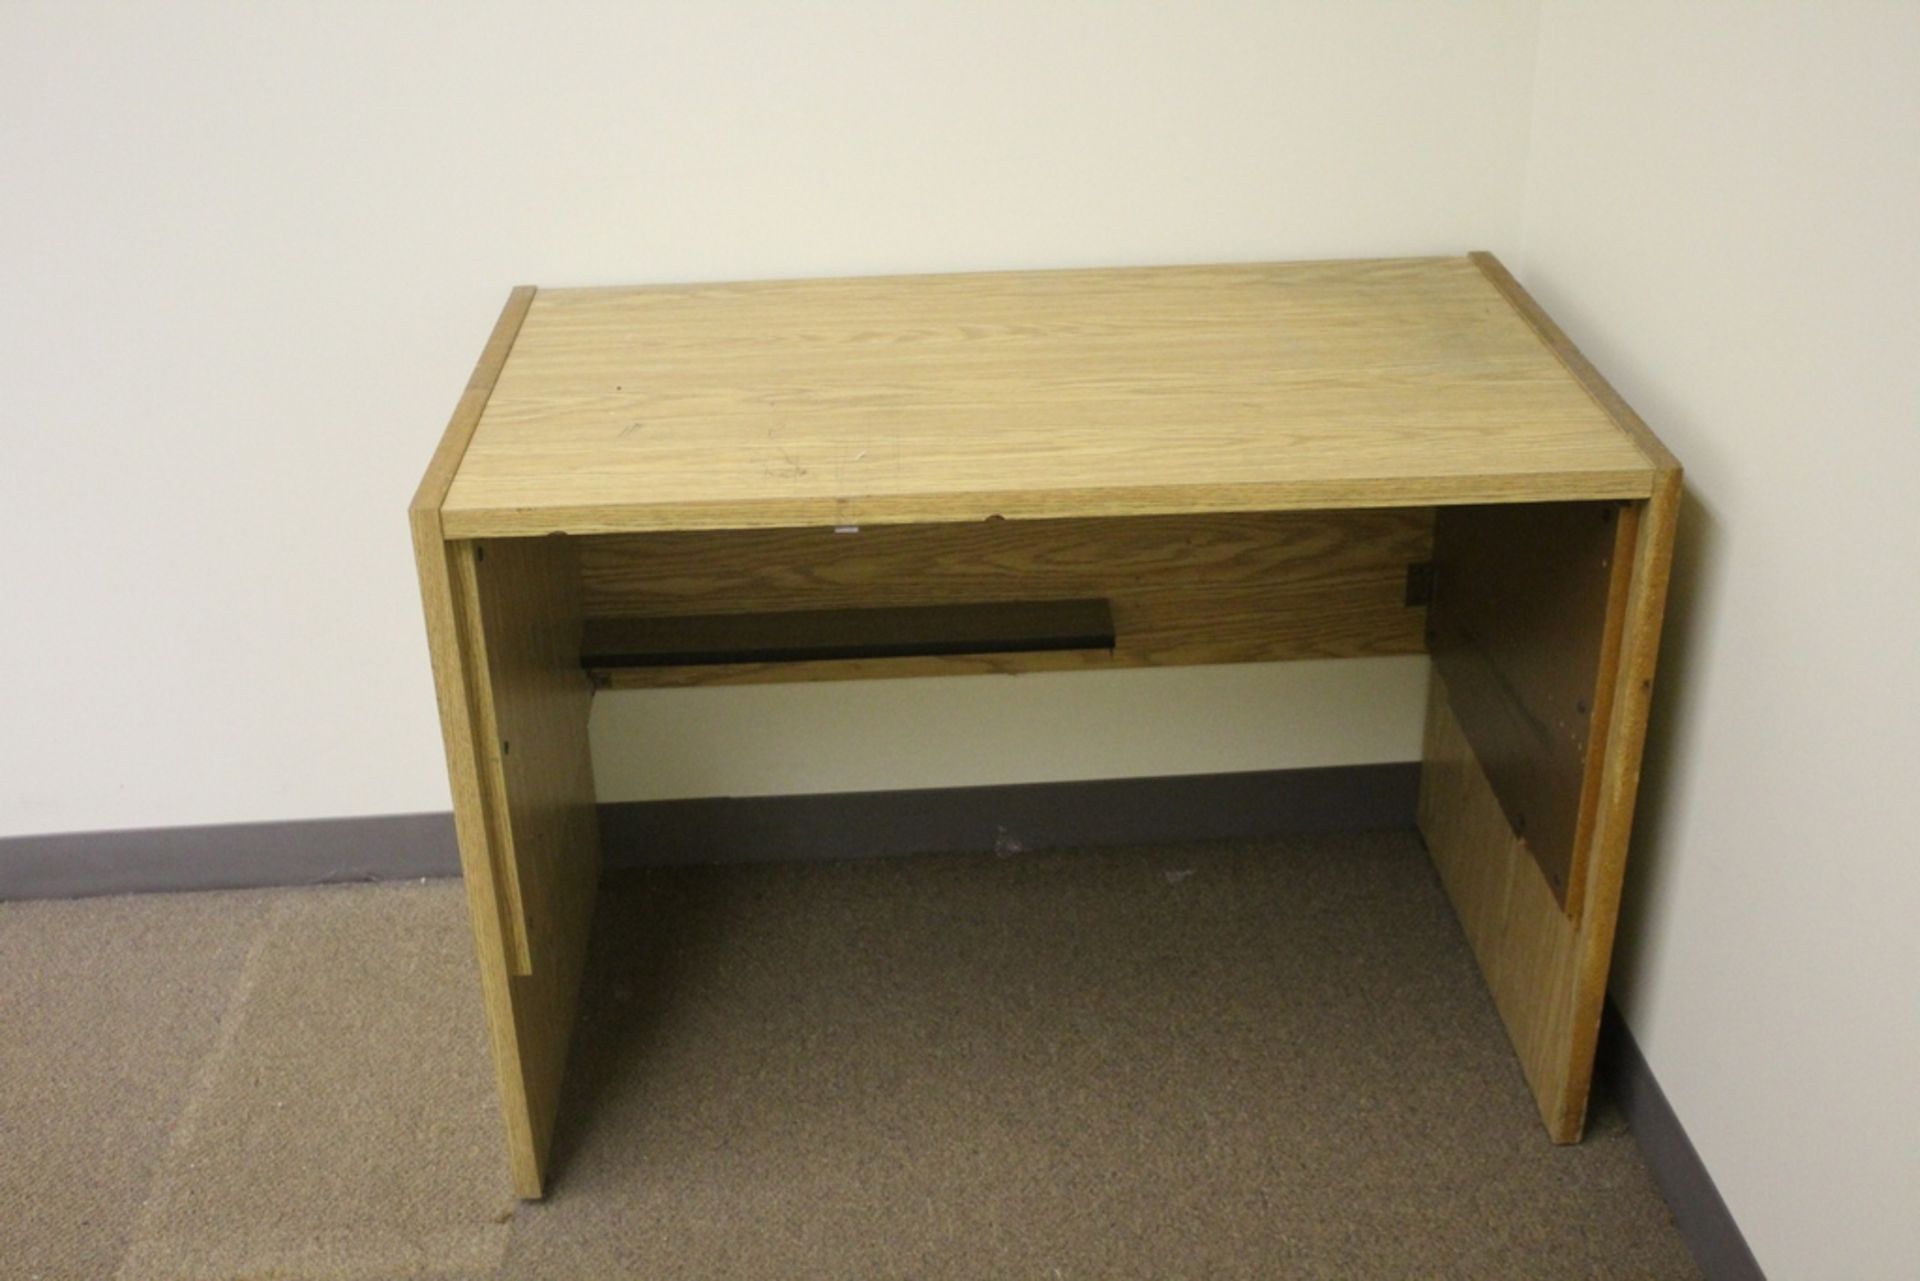 WOOD OFFICE DESK, 72" X 78" WITH TABLE 42" X 24" - Image 3 of 3